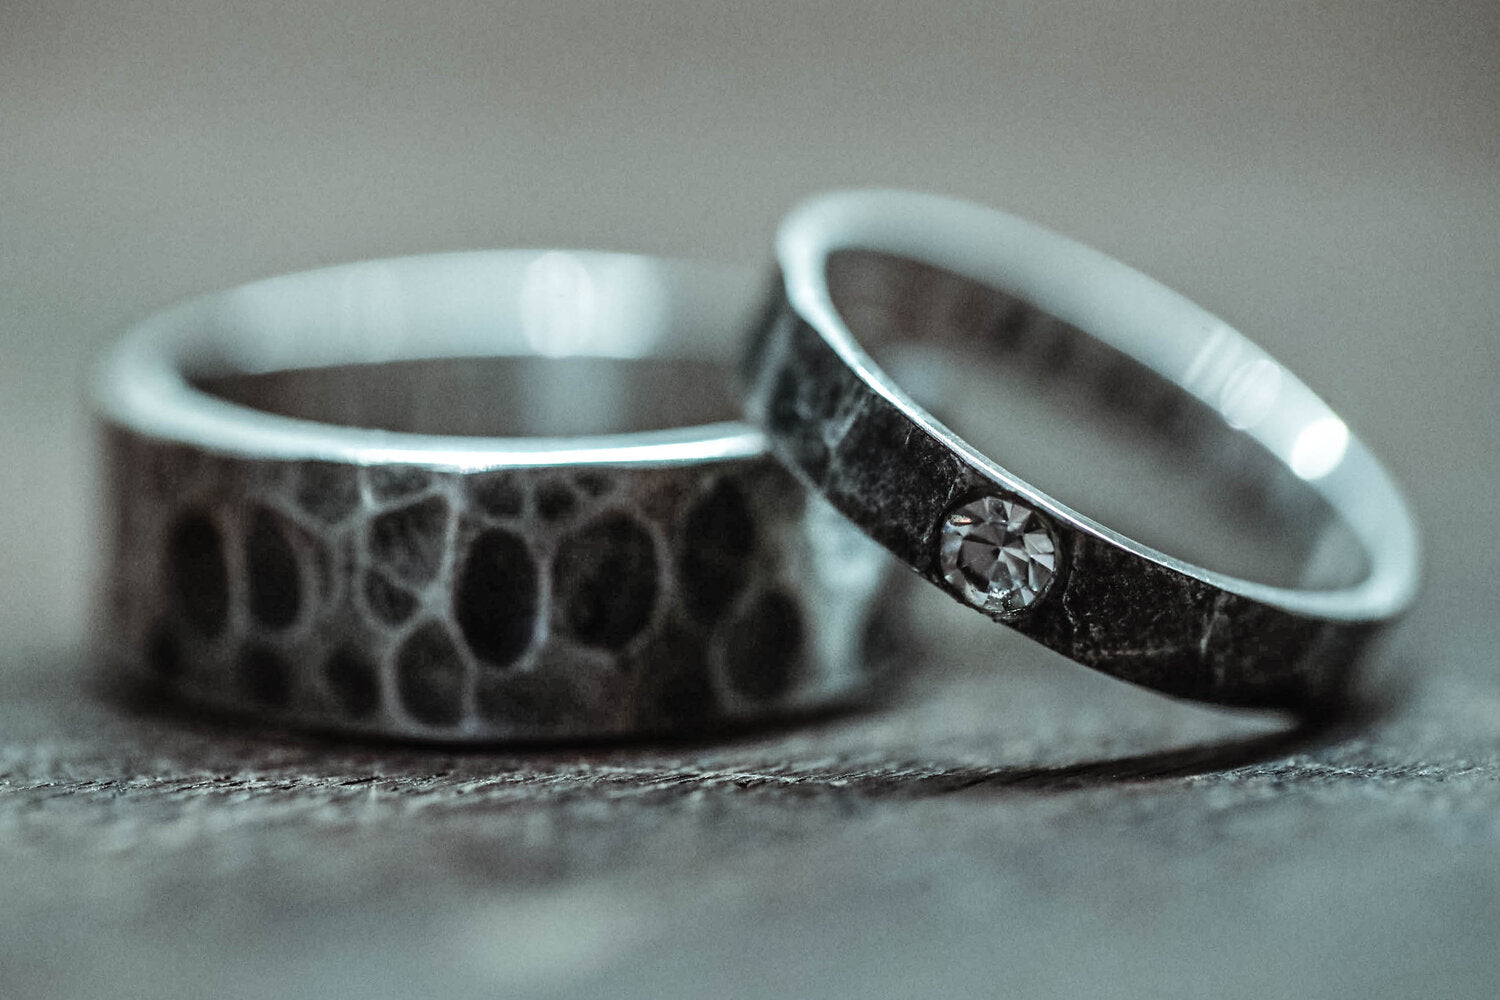 Rings designed at Agung Silver in Sideman, Bali